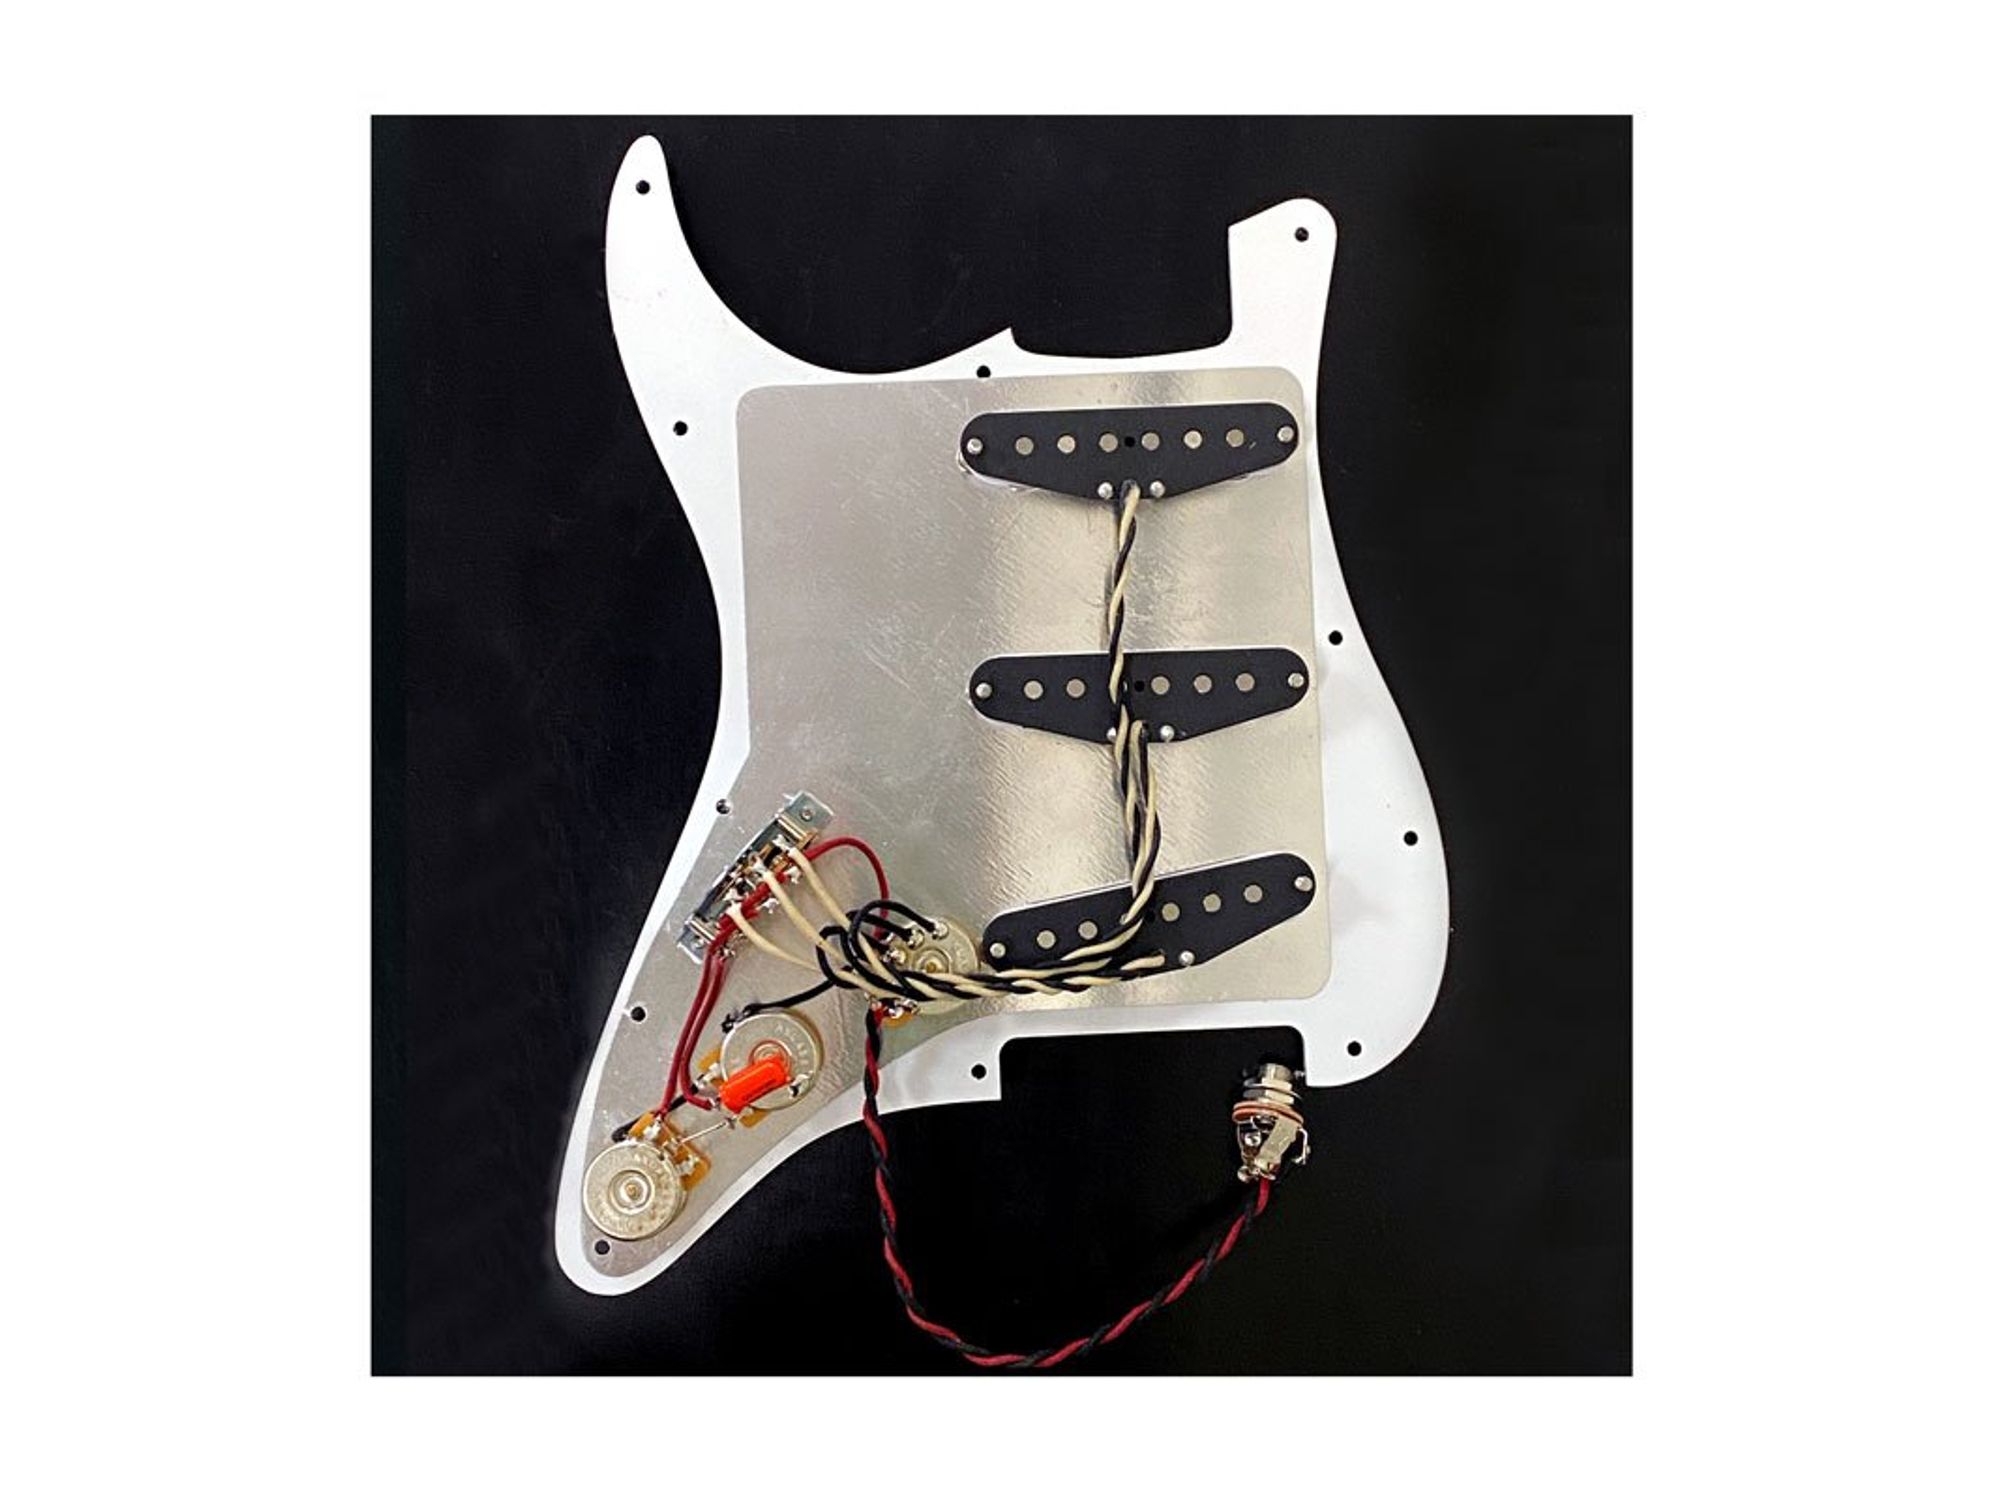 AxLabs Hardware Launches with the Habanero Loaded Pickguard